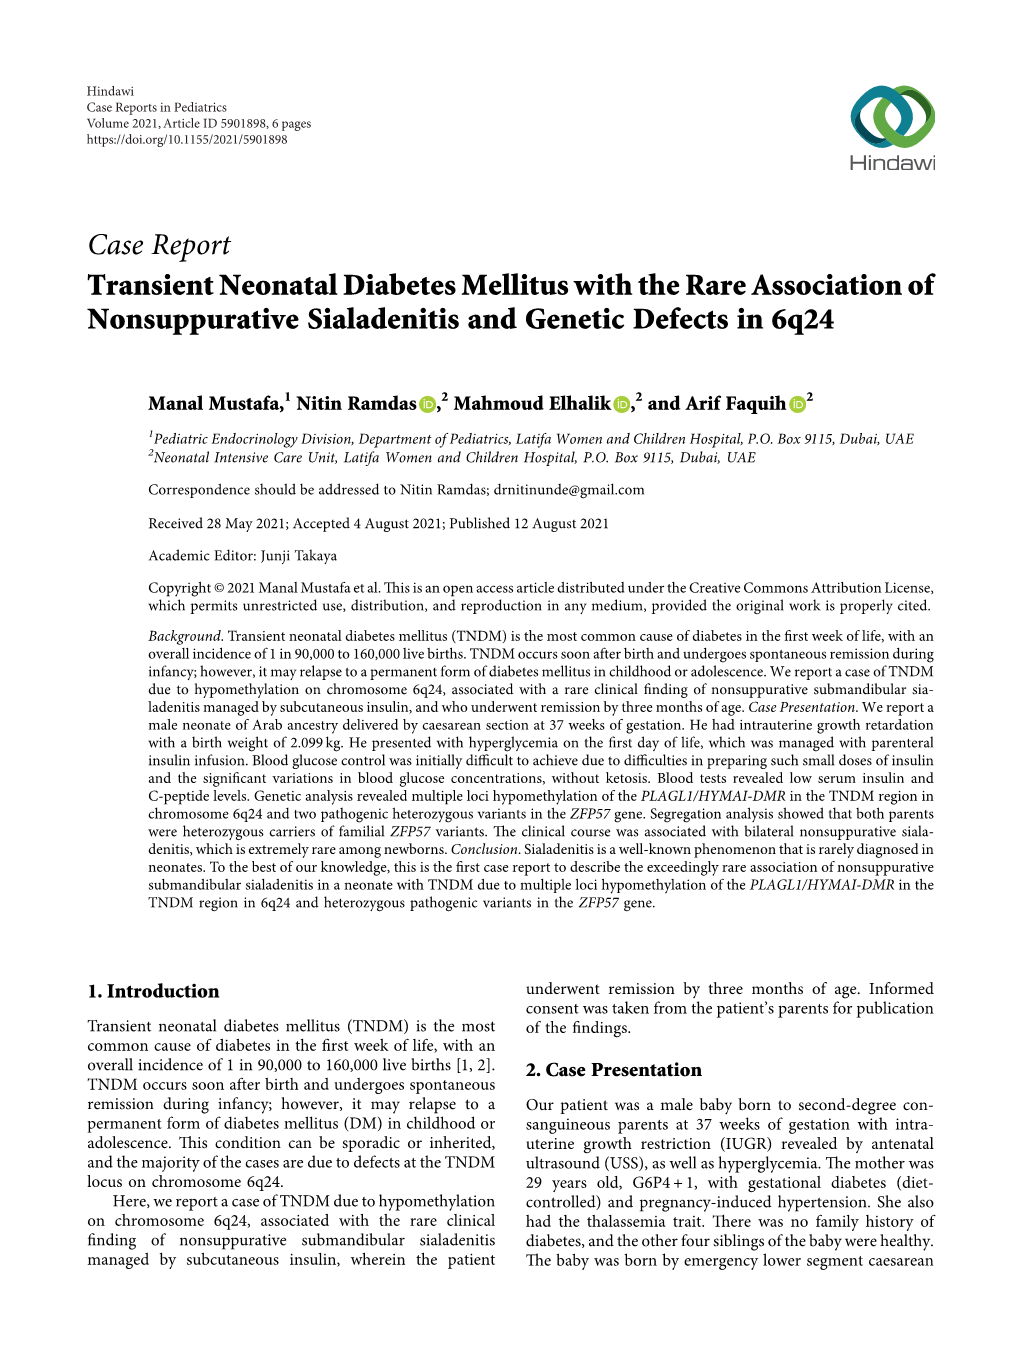 Transient Neonatal Diabetes Mellitus with the Rare Association of Nonsuppurative Sialadenitis and Genetic Defects in 6Q24